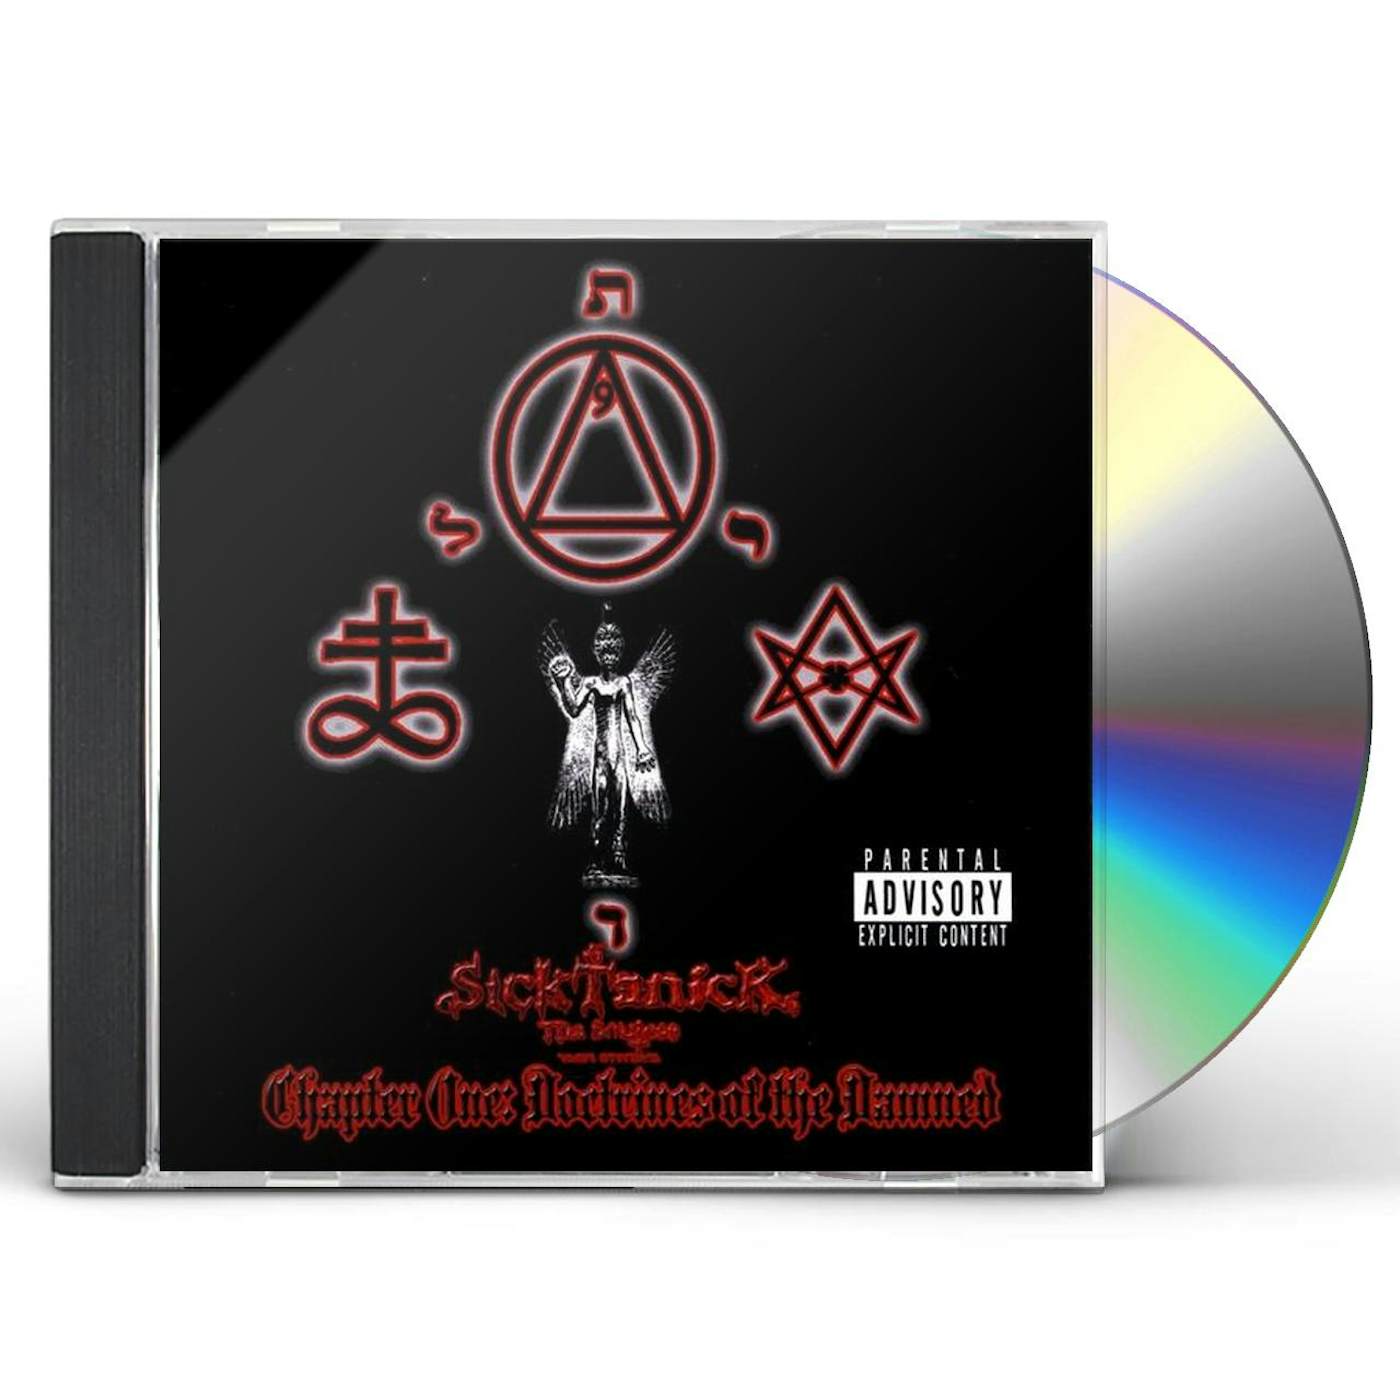 SickTanicK CHAPTER ONE: DOCTRINES OF THE DAMNED CD